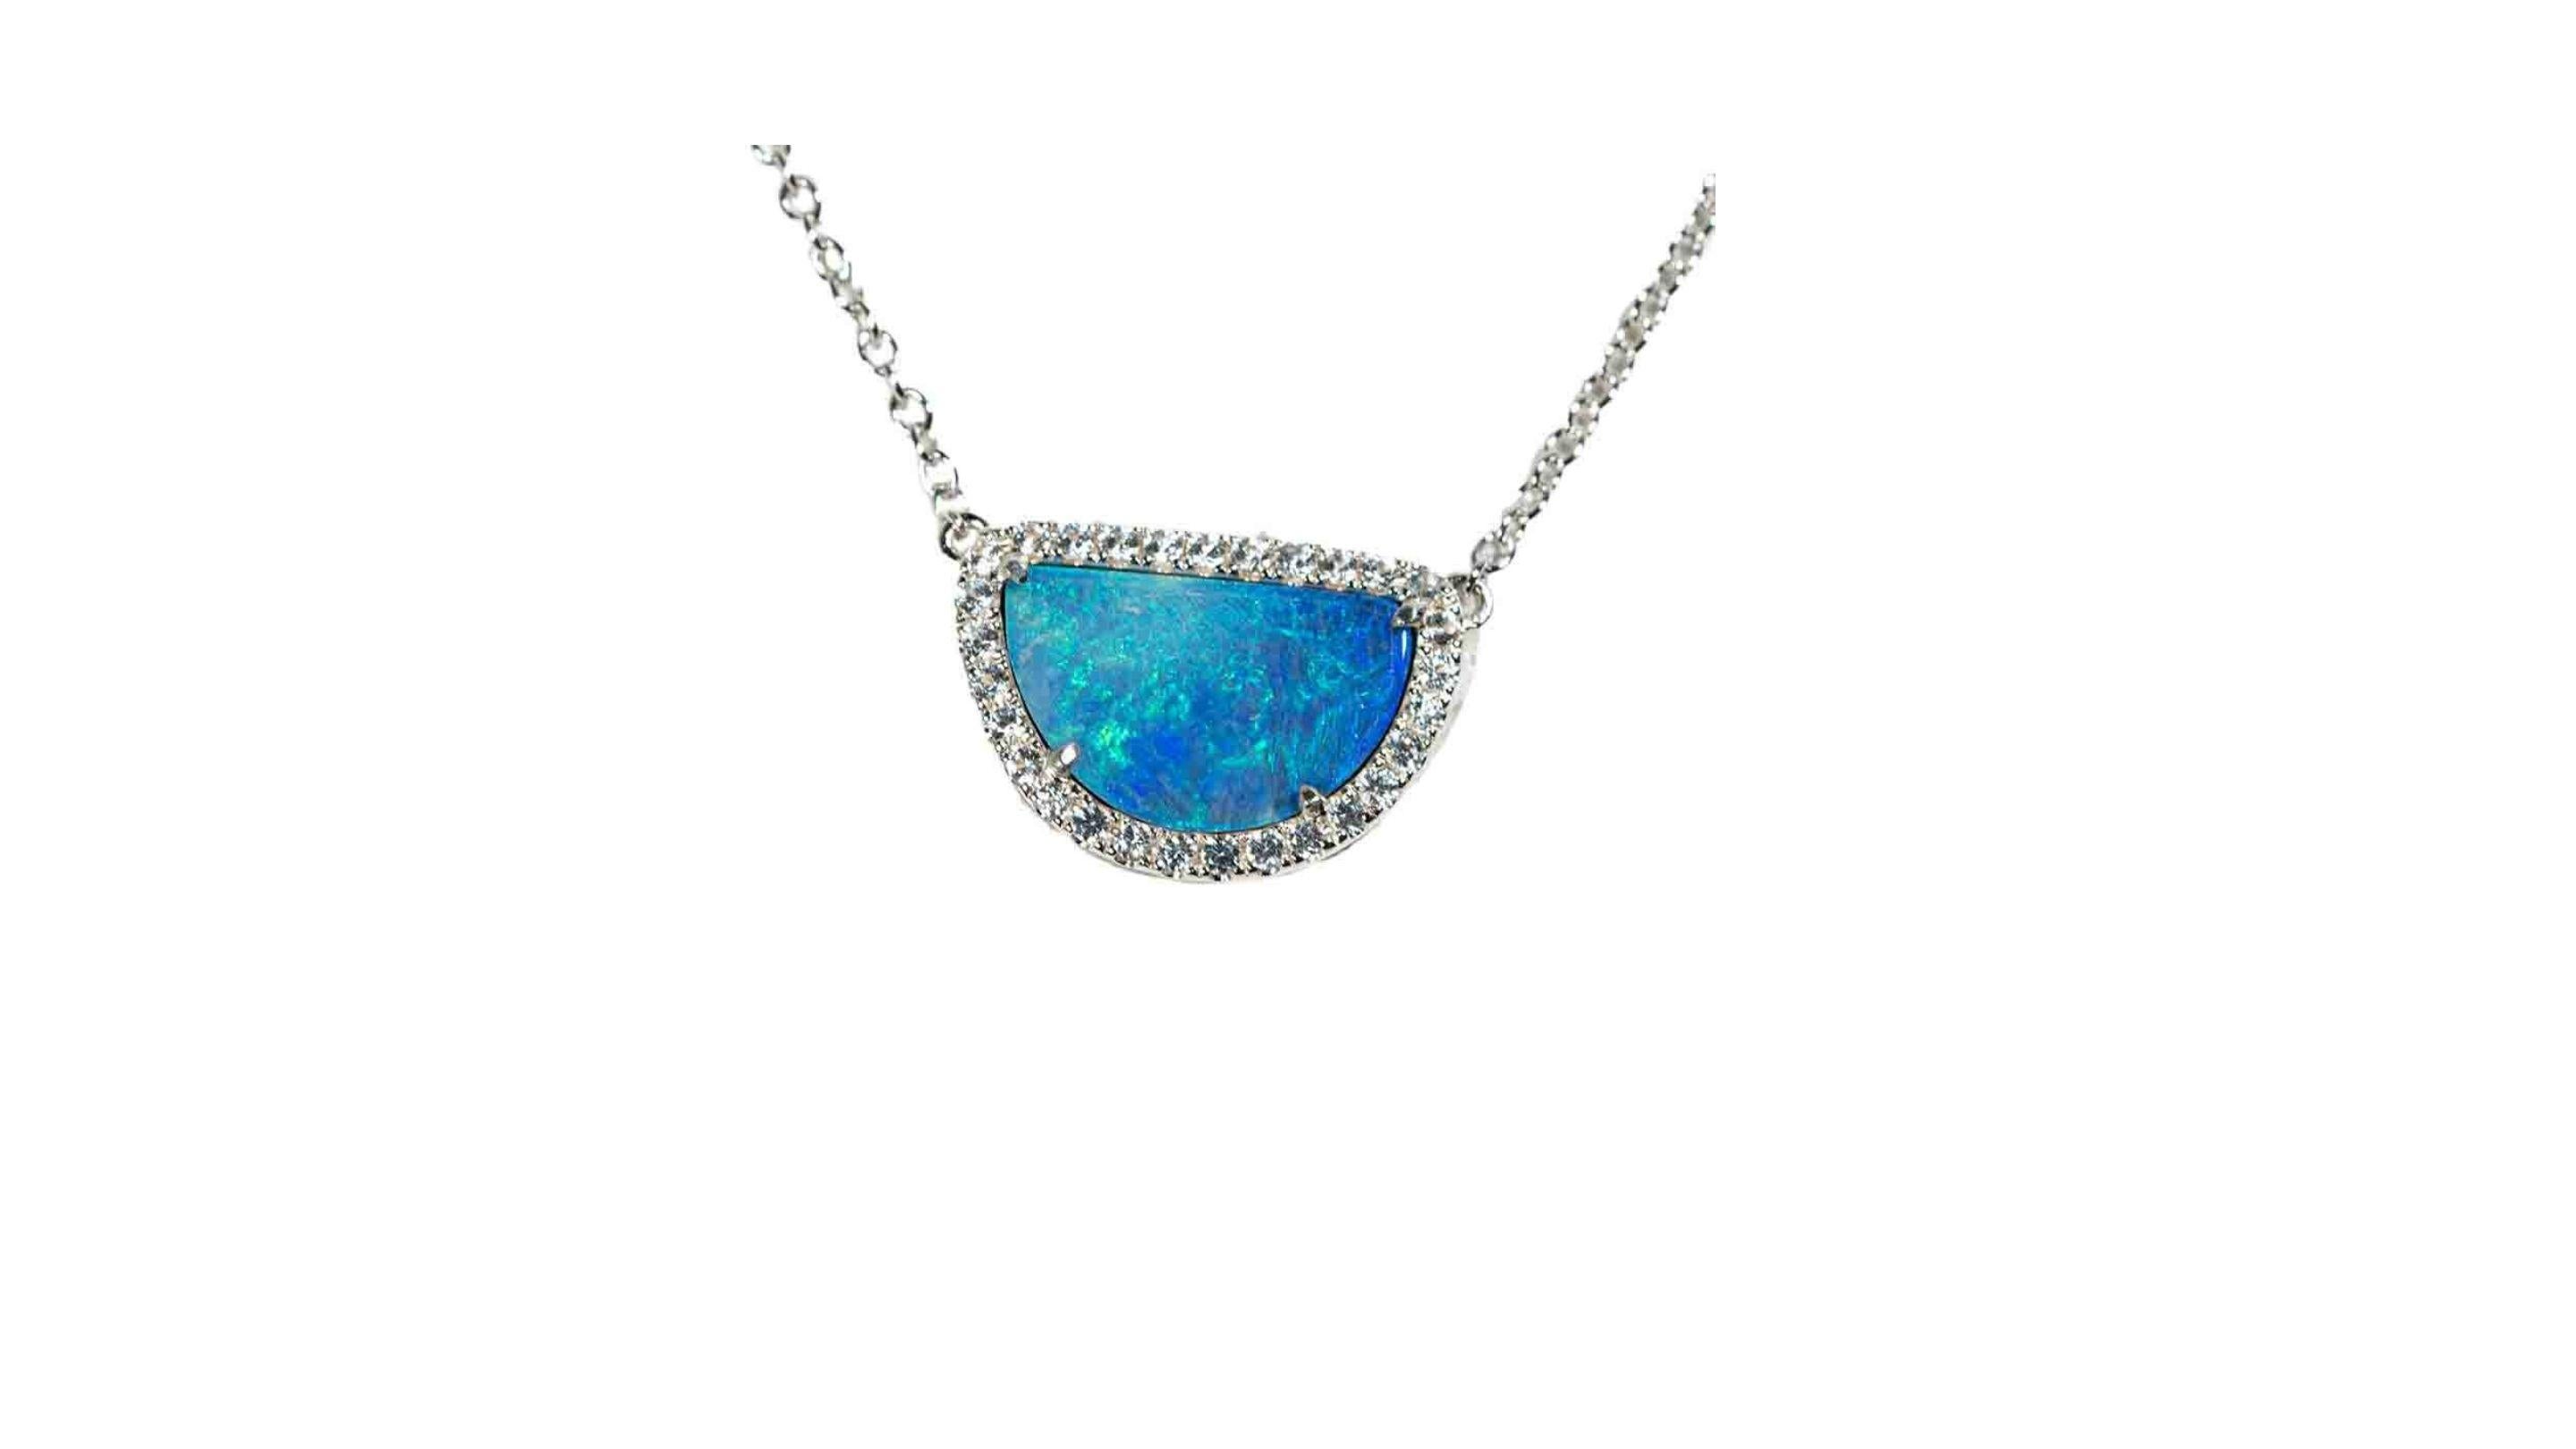 Australian Opal Necklace stands out with the White topaz stones  is like a sparkling half moon on a cold winters night...magical and hypnotizing in every way possible. Hand carved to give the stone a glowing finish. Featuring gem quality